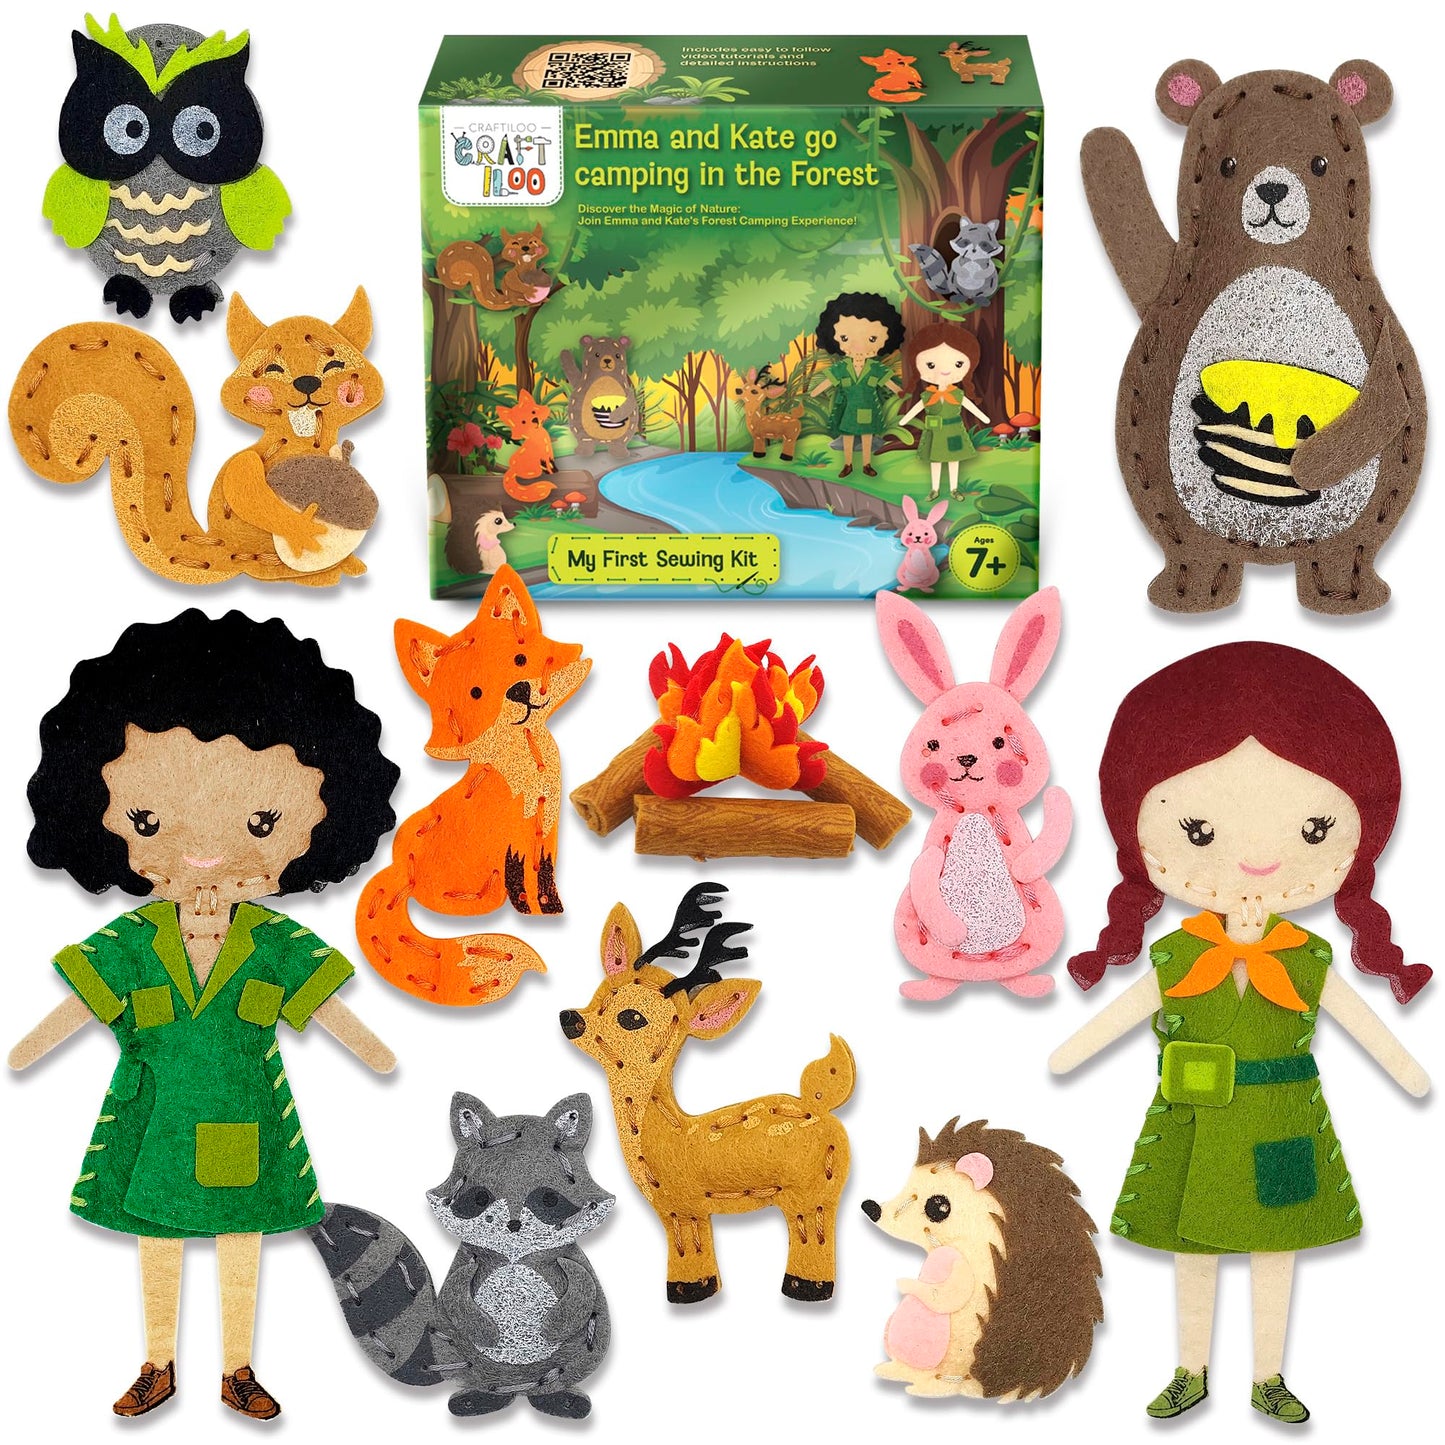 CRAFTILOO Woodland Sewing Kit for Kids, Fun and Educational Fairytale Craft Set for Boys and Girls Age 7-12, Sew Your Own Felt Forest Animal Craft